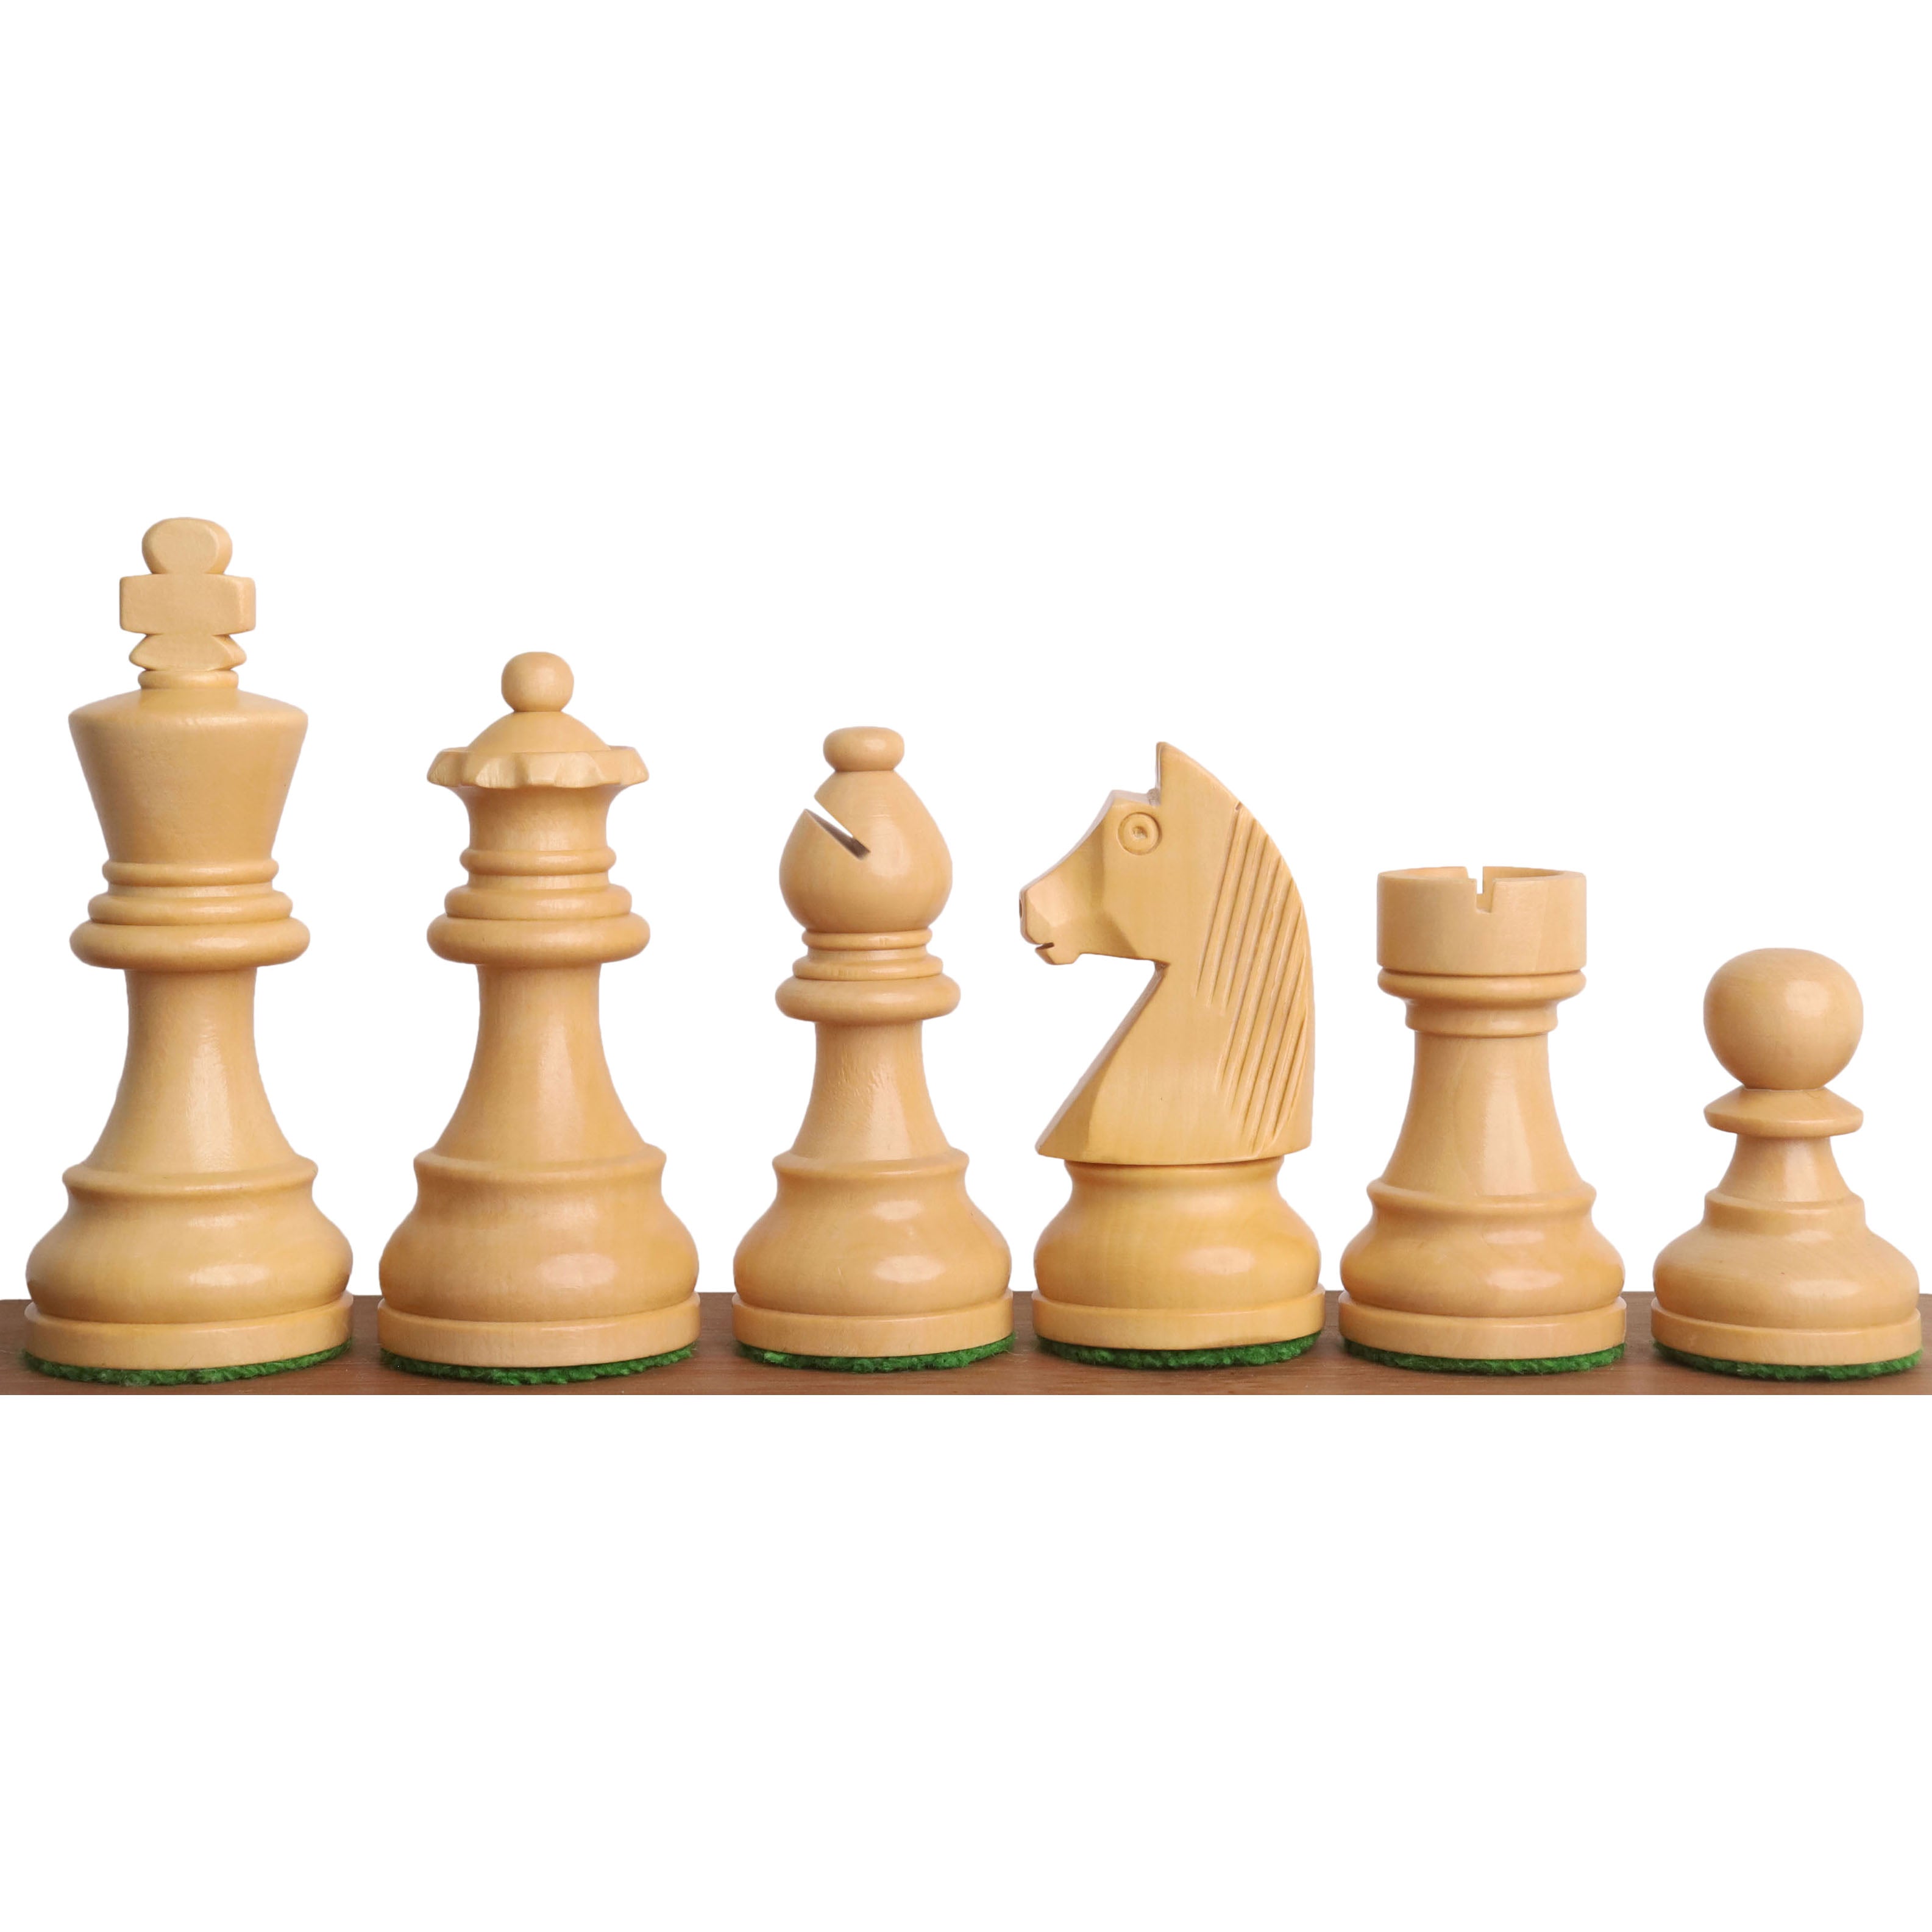 3.3" Tournament Staunton Chess Set- Chess Pieces Only - Golden Rosewood - Compact size